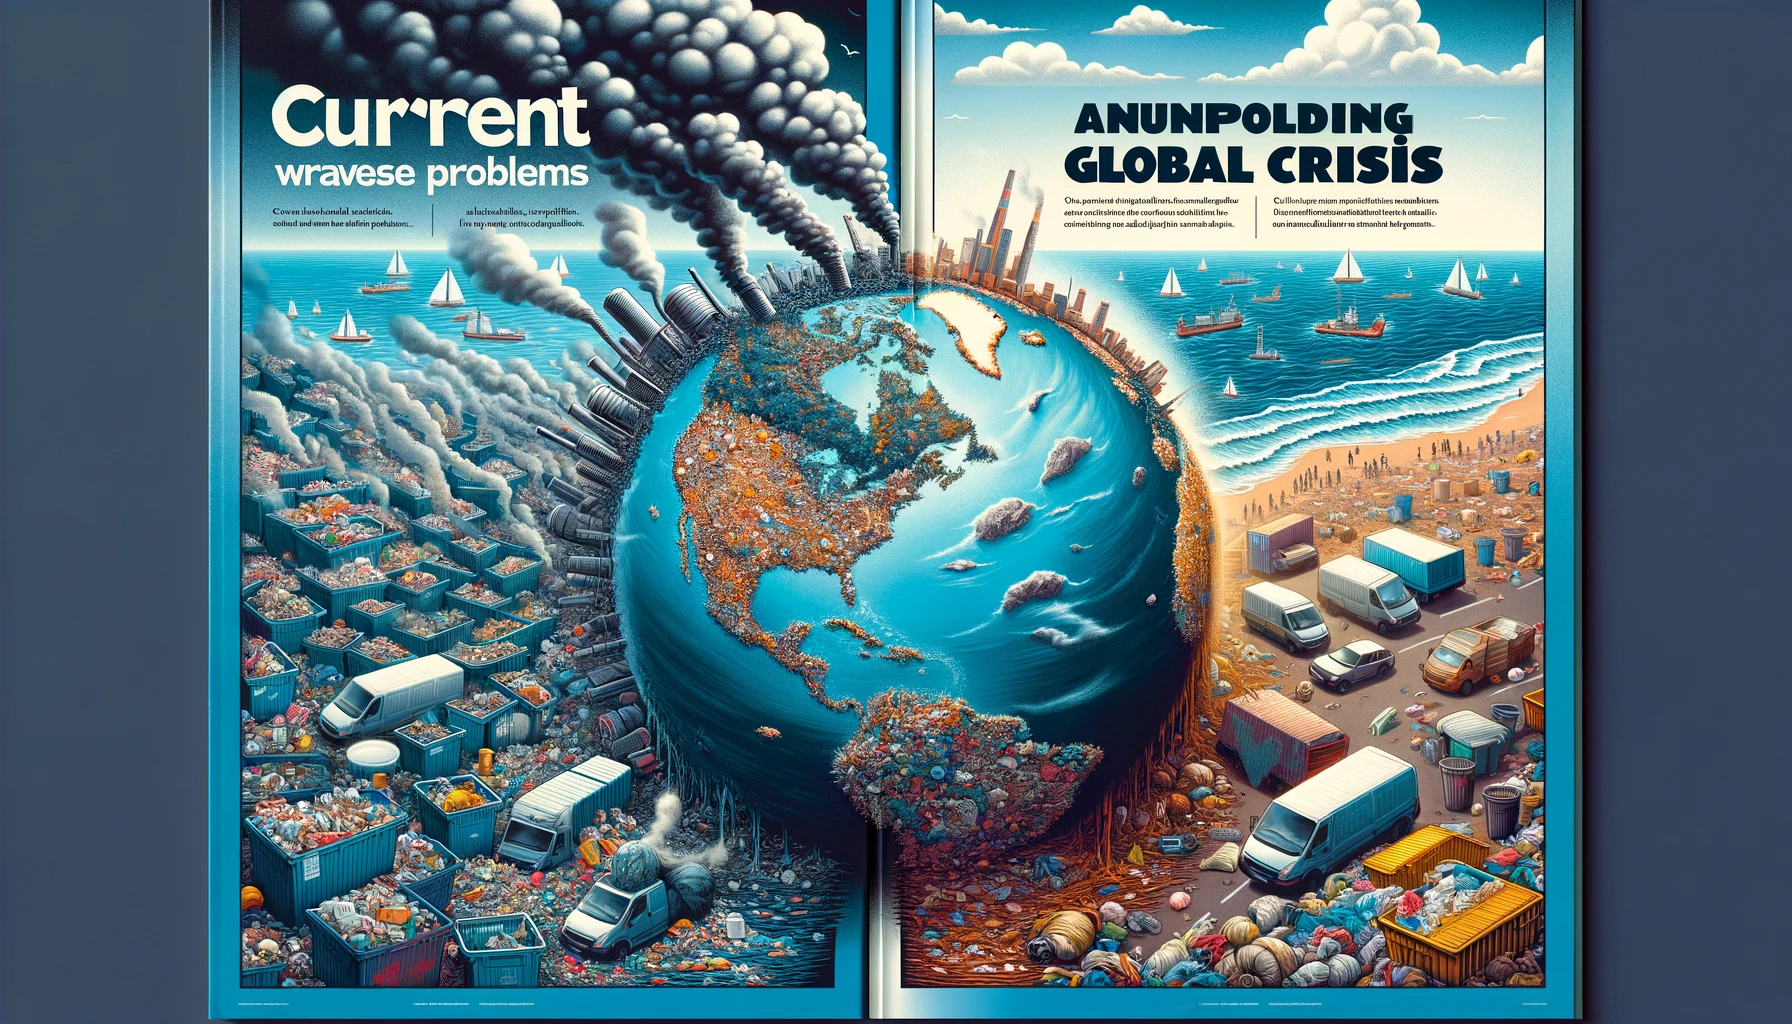 Current Waste Problems: An Unfolding Global Crisis